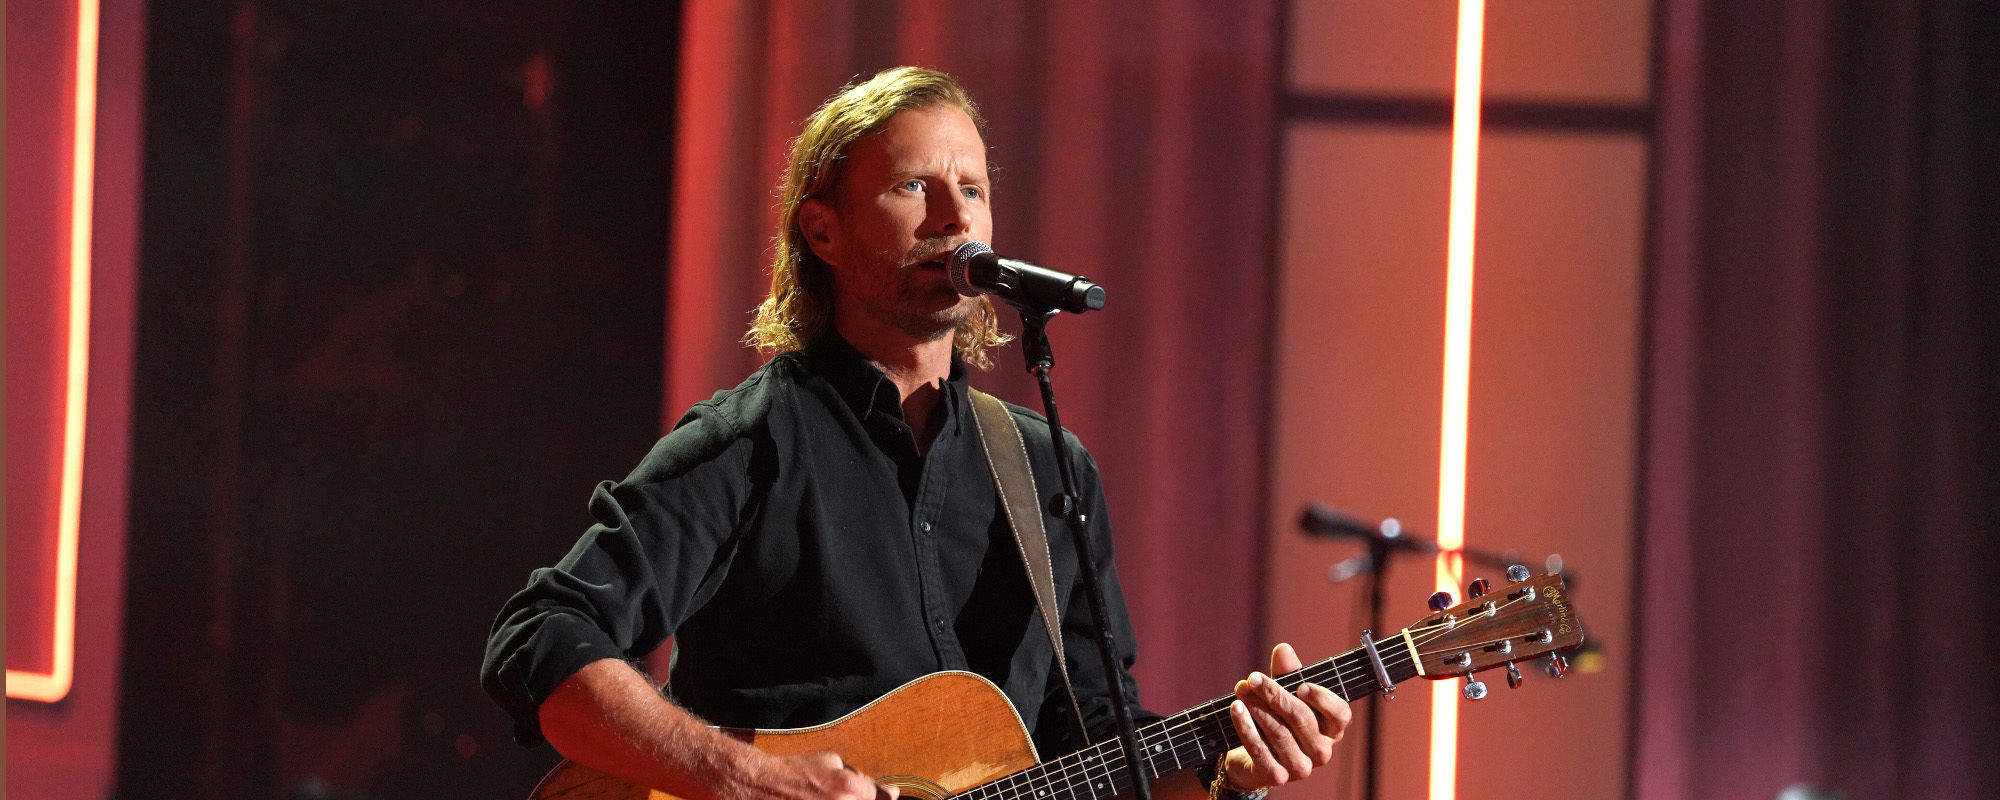 Dierks Bentley Turns Tom Petty’s “American Girl” Bluegrass on Forthcoming Tribute Album